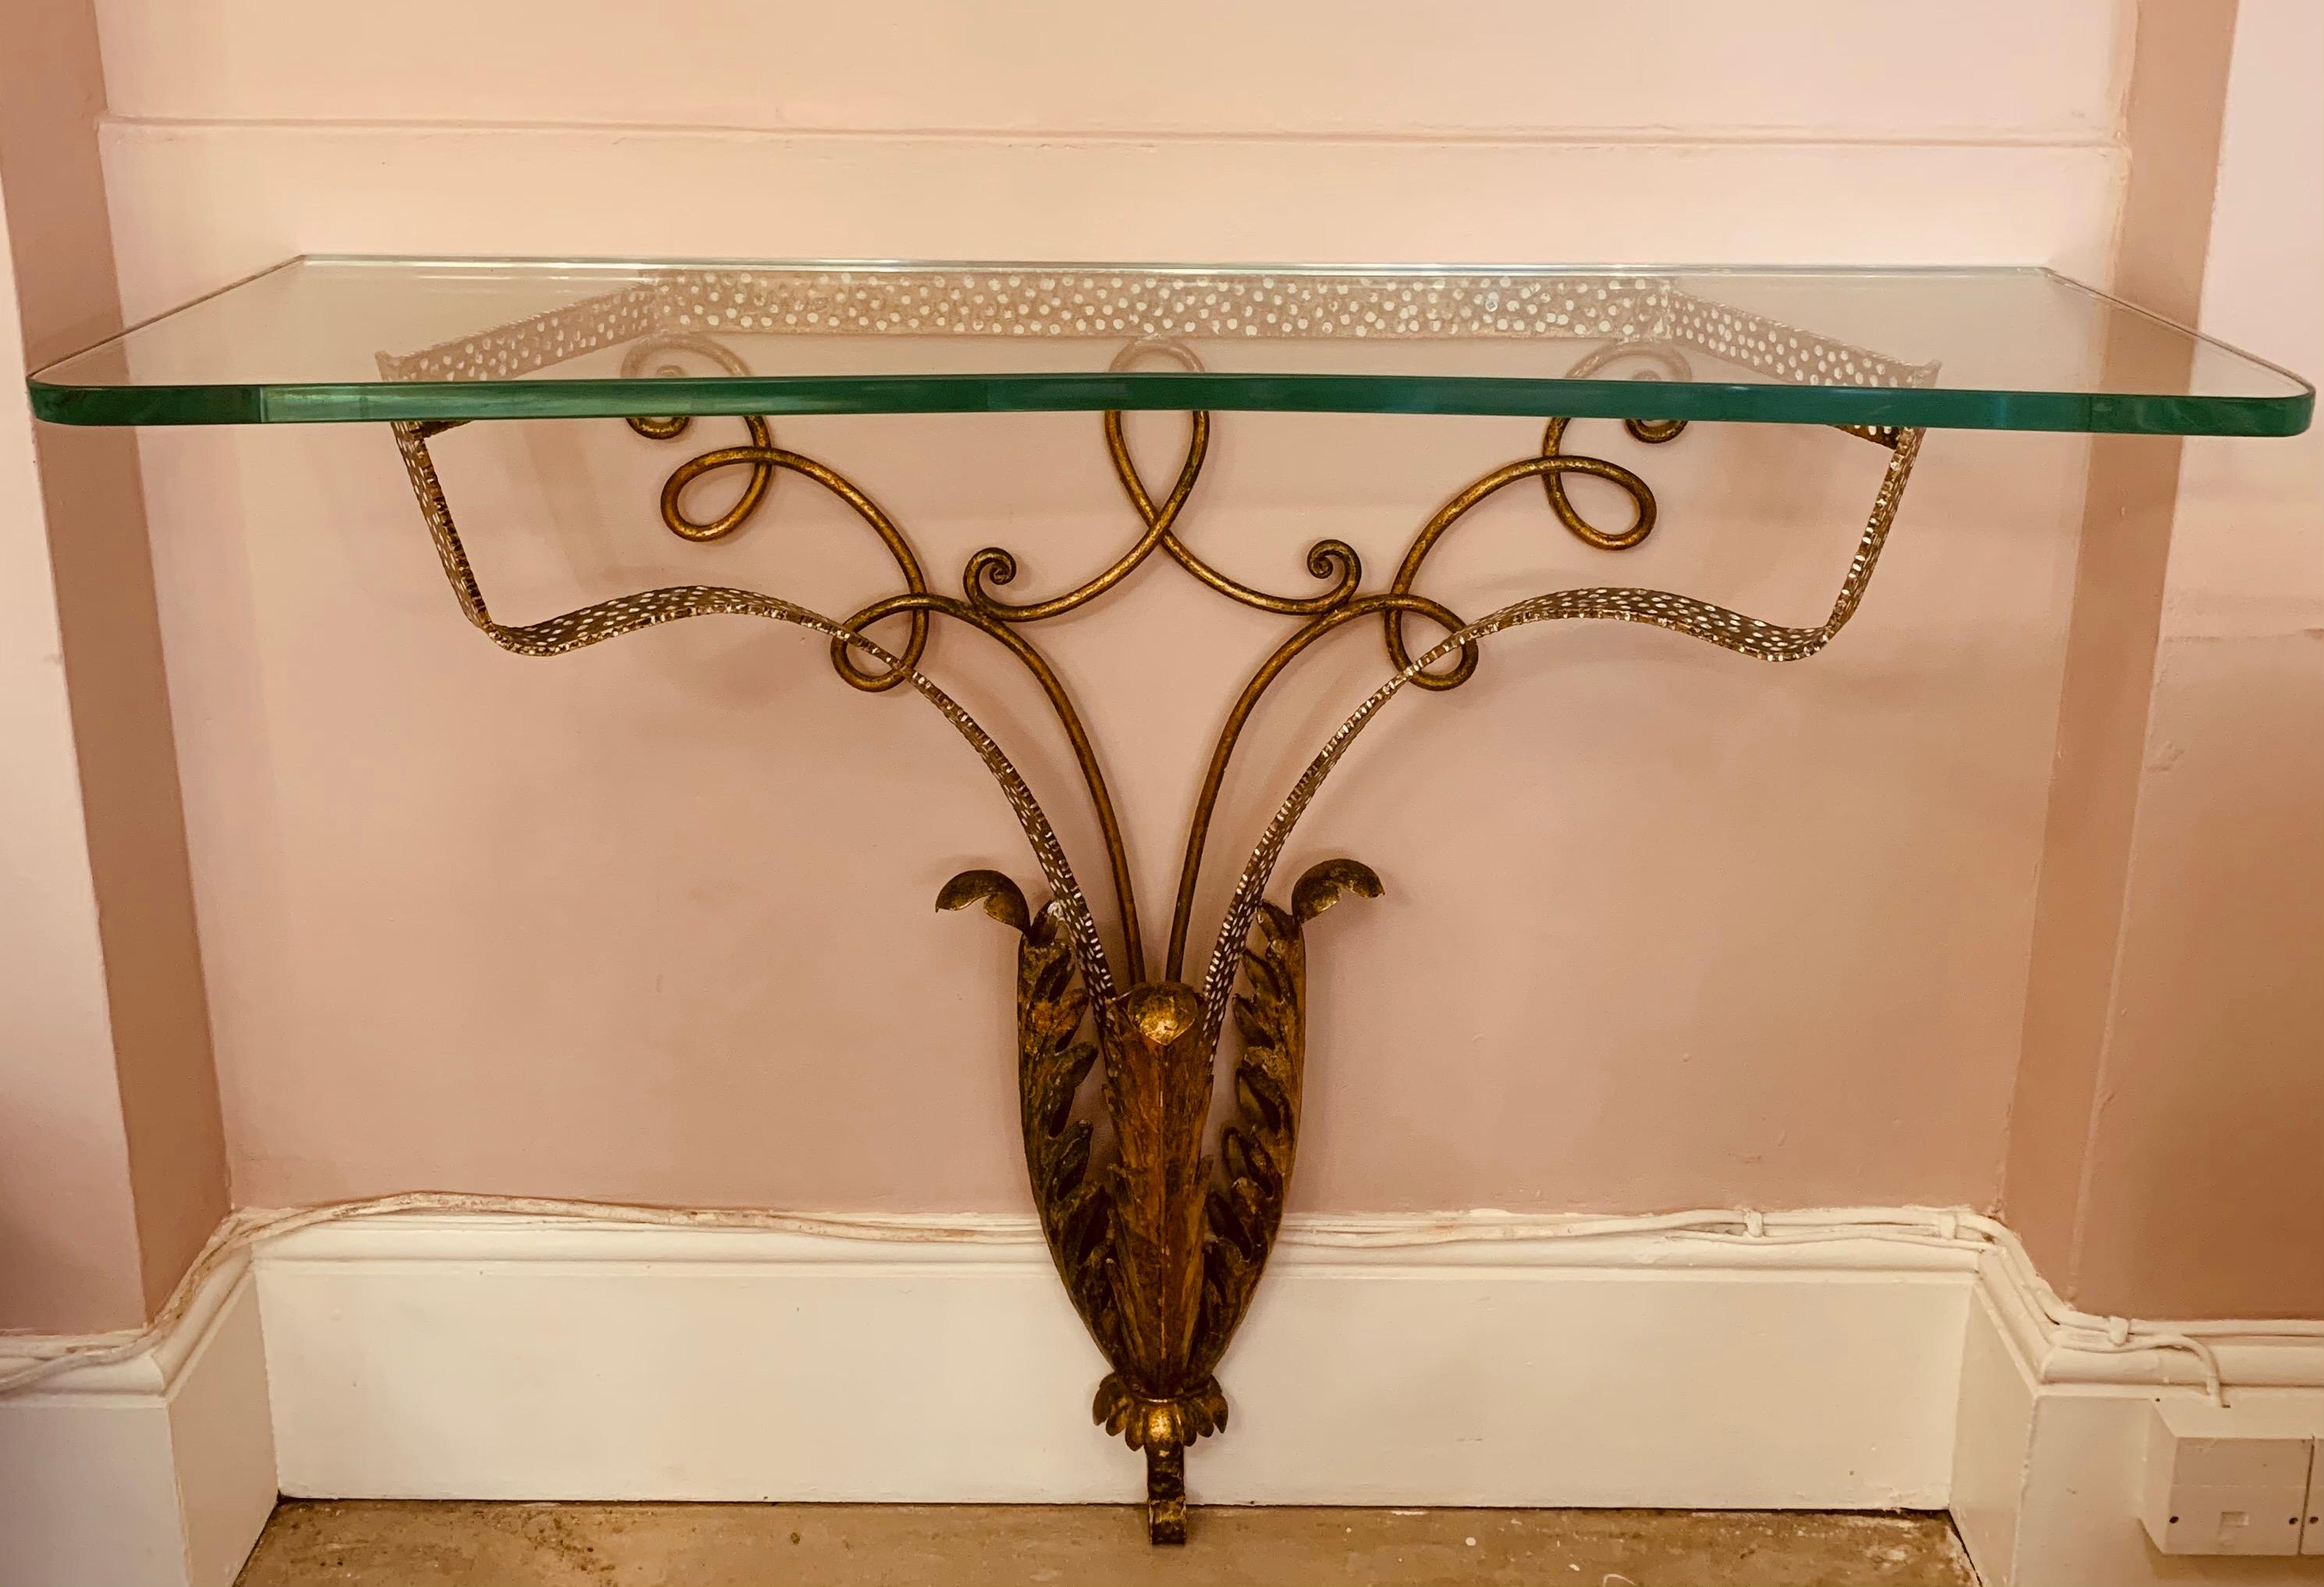 A striking and highly decorative 1950s, Italian, Pier Luigi Colli, gold with white spotted detail, wrought iron, wall mounted, console table. The fun white spotted outer frame is accented with scrolled iron detailed metal work. The slim base